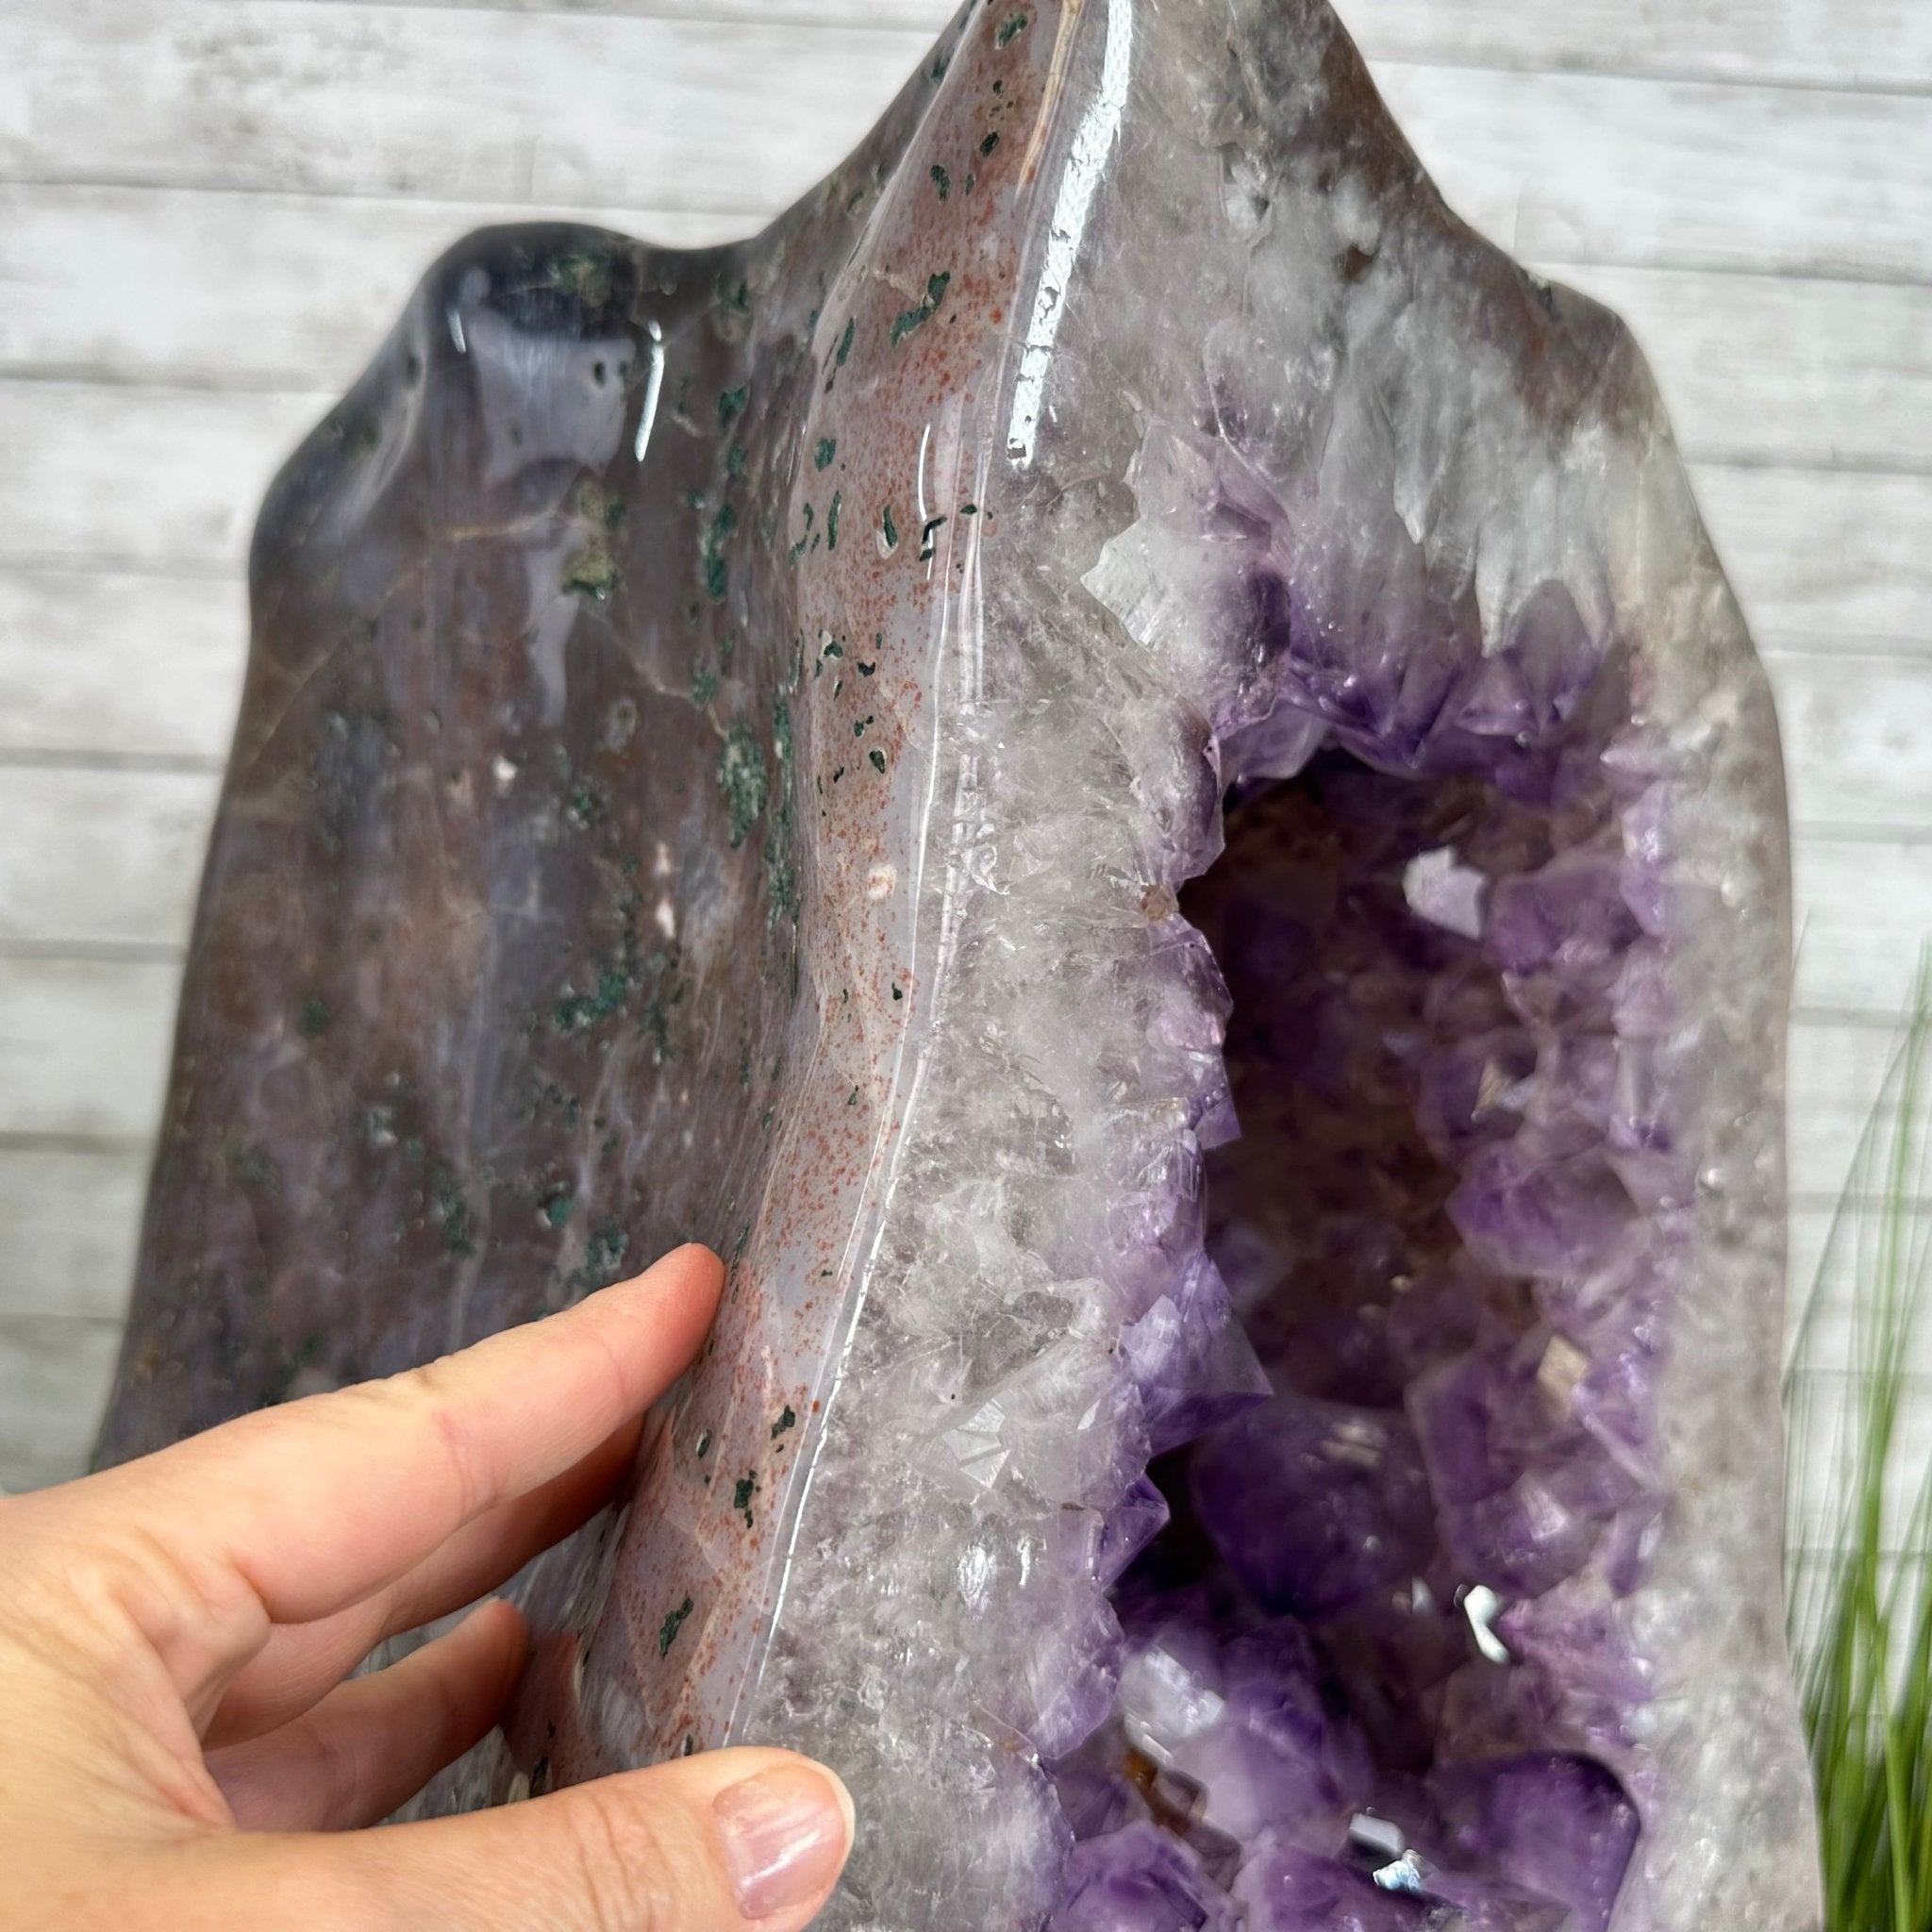 Extra Quality Polished Brazilian Amethyst Cathedral, 134.5 lbs & 18.5" tall Model #5602-0167 by Brazil Gems - Brazil GemsBrazil GemsExtra Quality Polished Brazilian Amethyst Cathedral, 134.5 lbs & 18.5" tall Model #5602-0167 by Brazil GemsPolished Cathedrals5602-0167